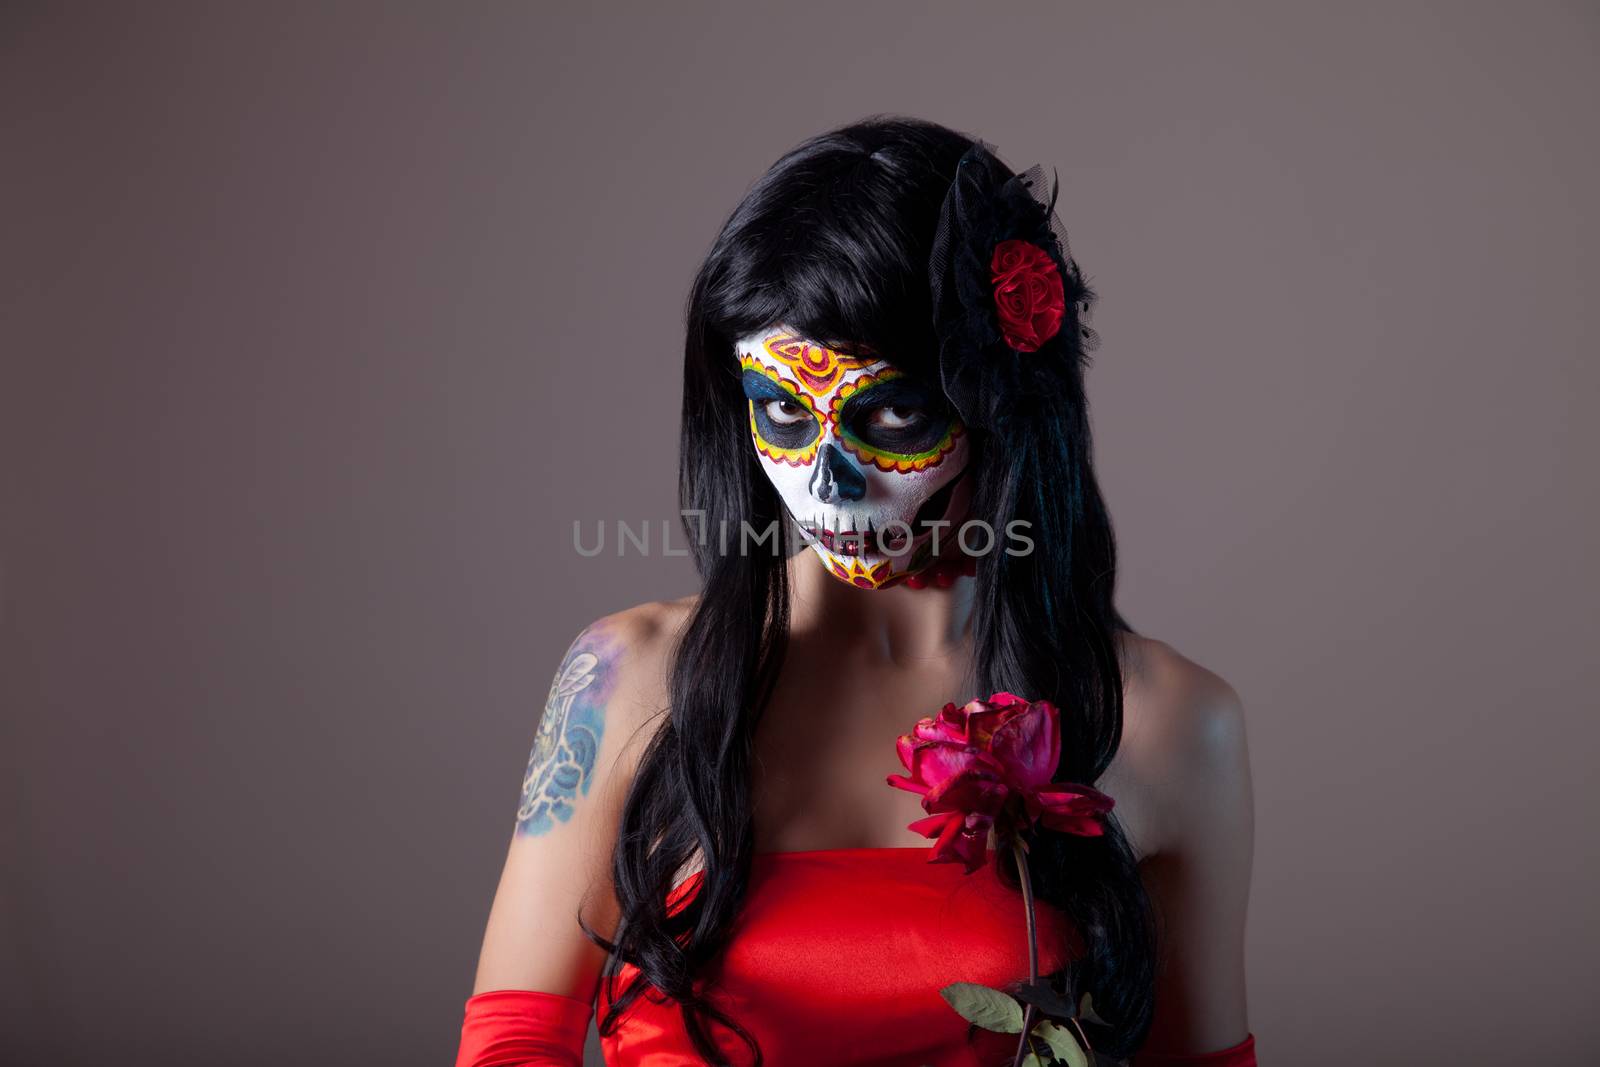 Portrait of sugar skull girl with red rose, Day of the Dead Halloween theme 